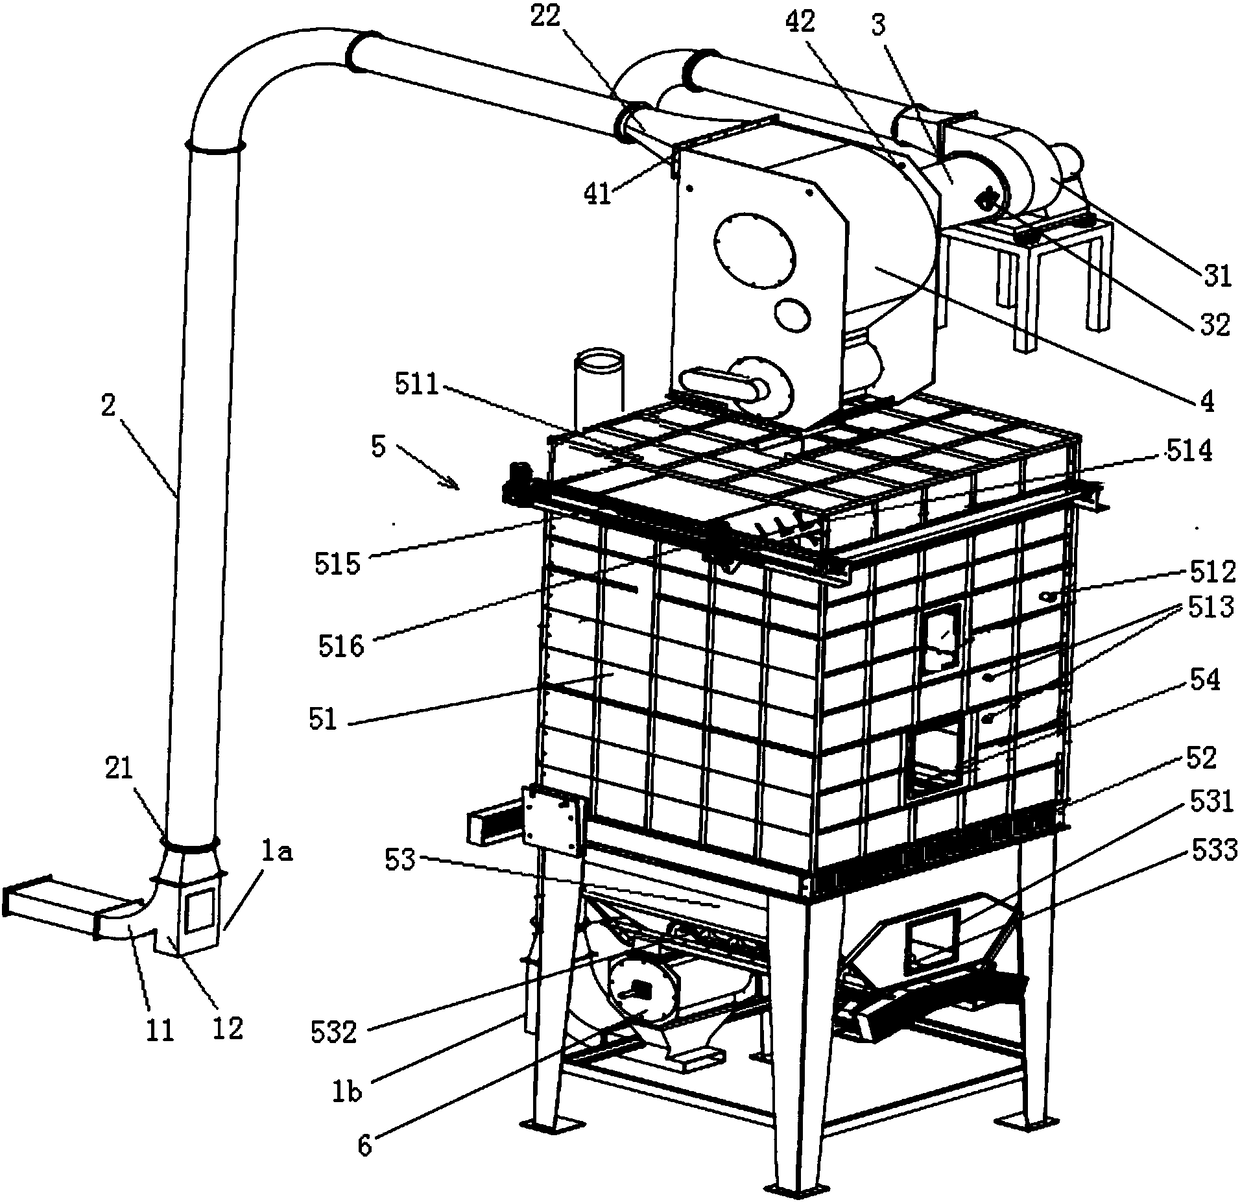 Vertical device for removing impurities and storing tobacco chips